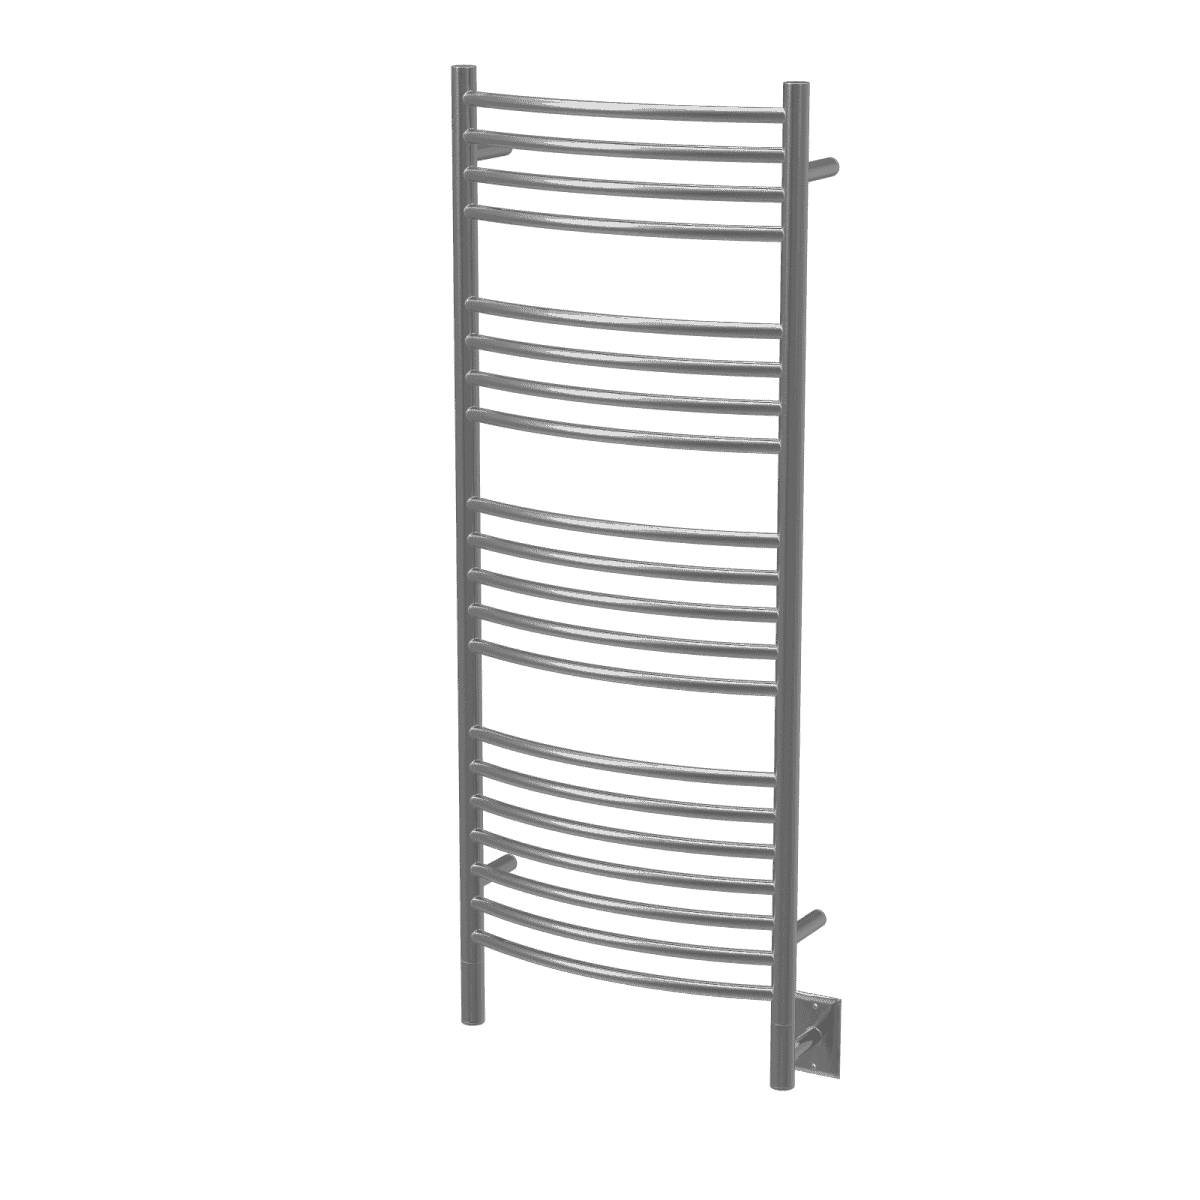 Amba DCB Model D Curved 20 Bar Hardwired Towel Warmer - Brushed